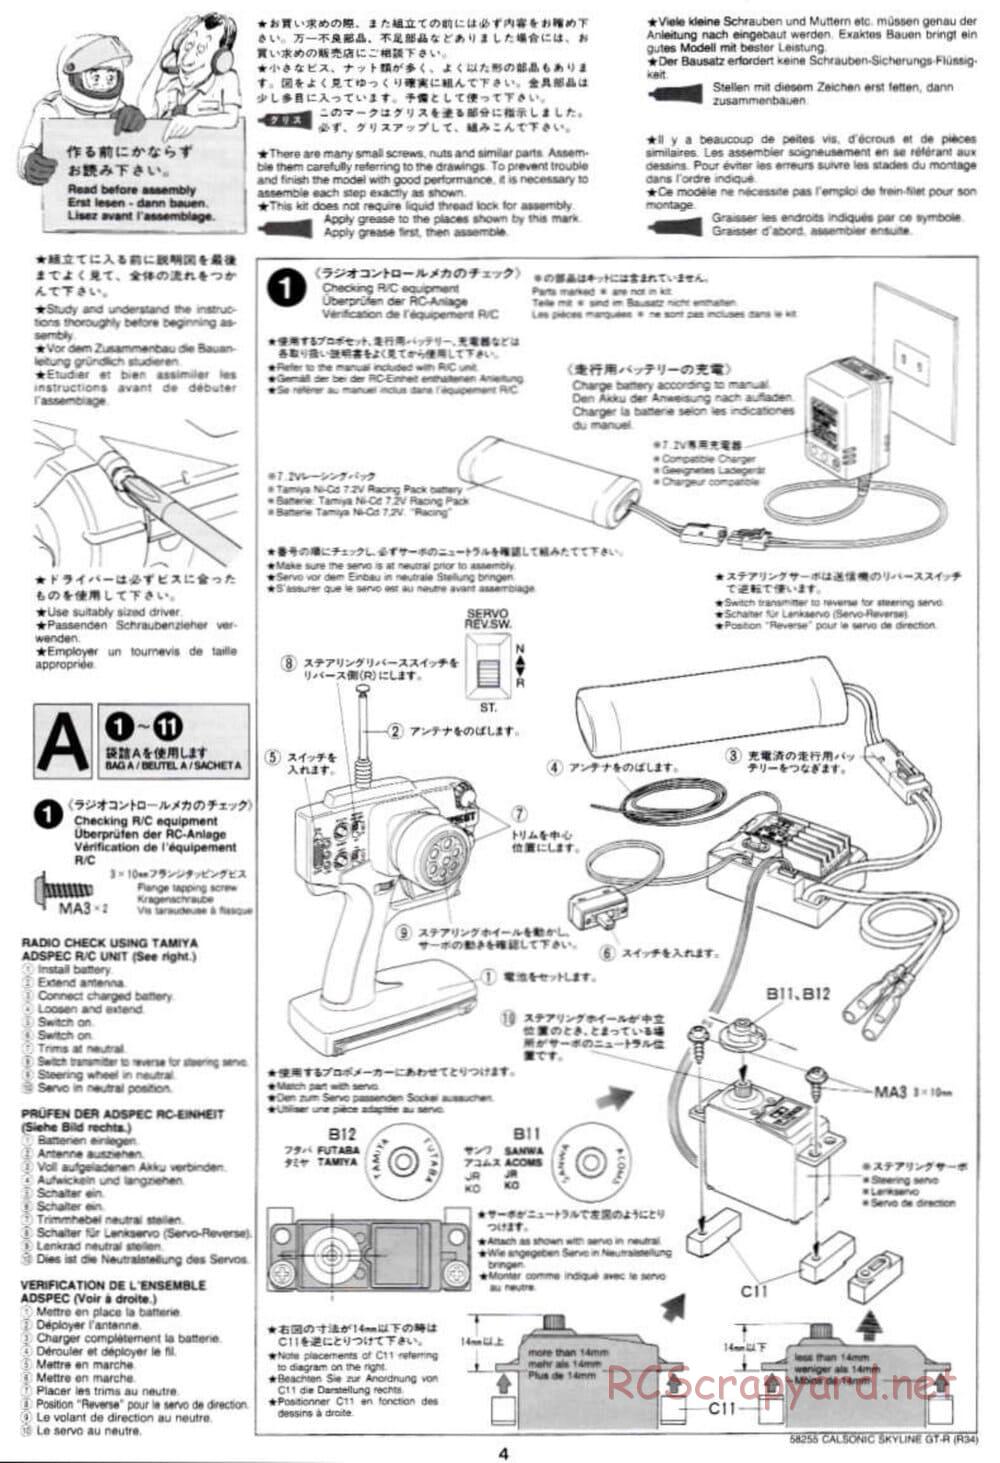 Tamiya - Calsonic Skyline GT-R (R34) - TL-01 Chassis - Manual - Page 4